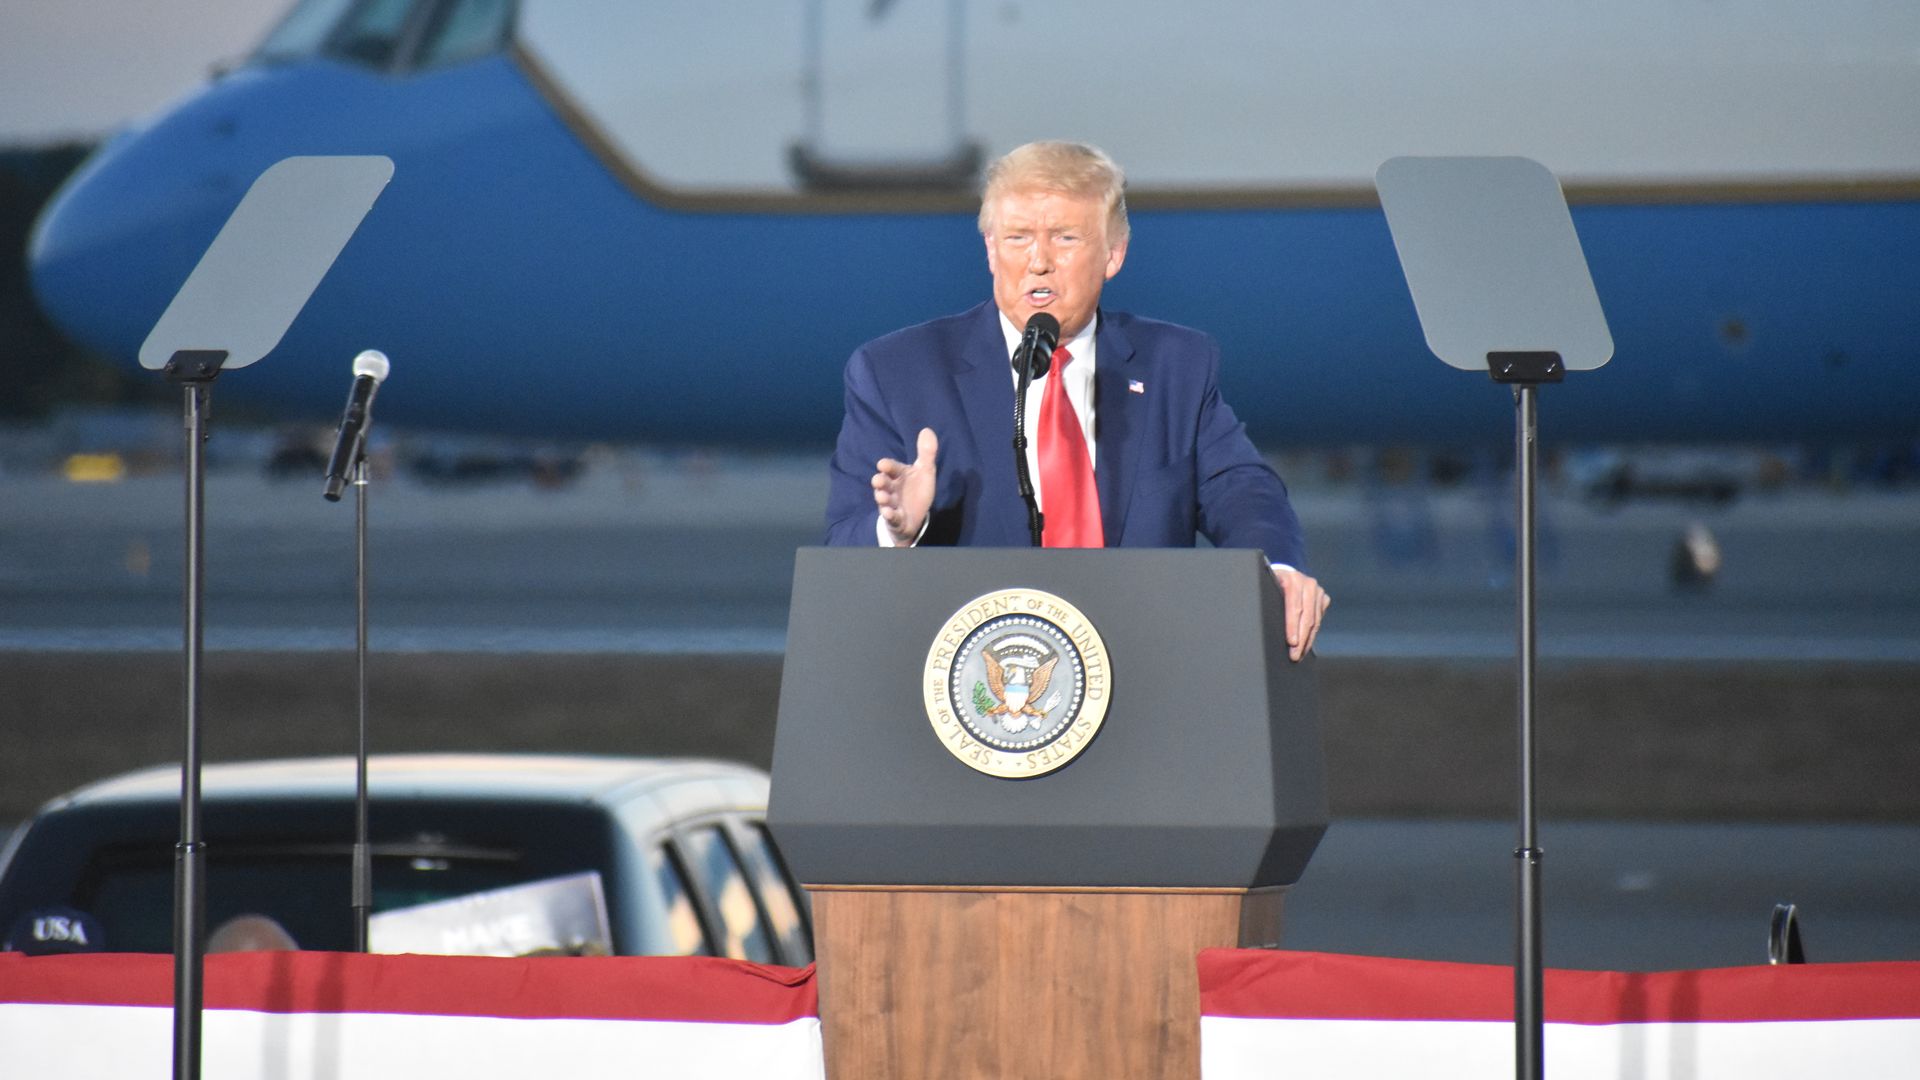 President Donald J. Trump delivers remarks at at Pro Star Aviation LLC at Londonderry